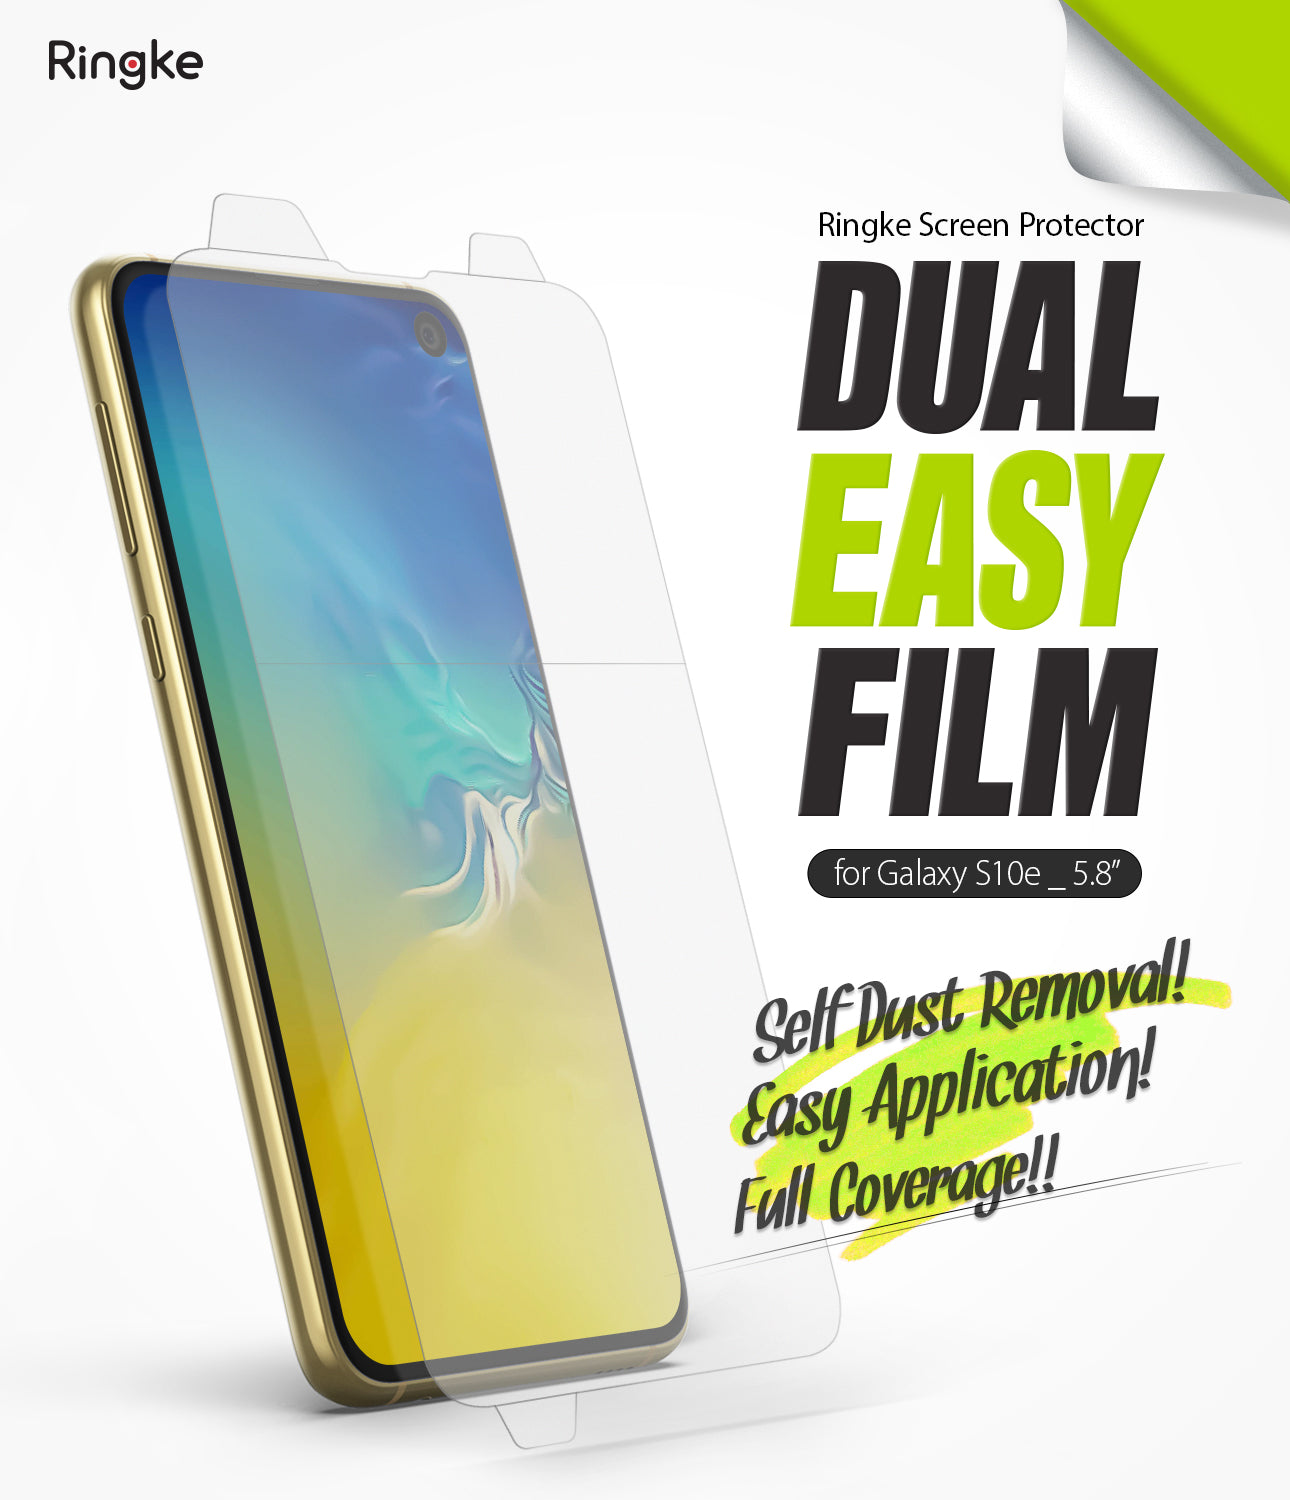 galaxy s10e dual easy full cover screen protector 2 pack